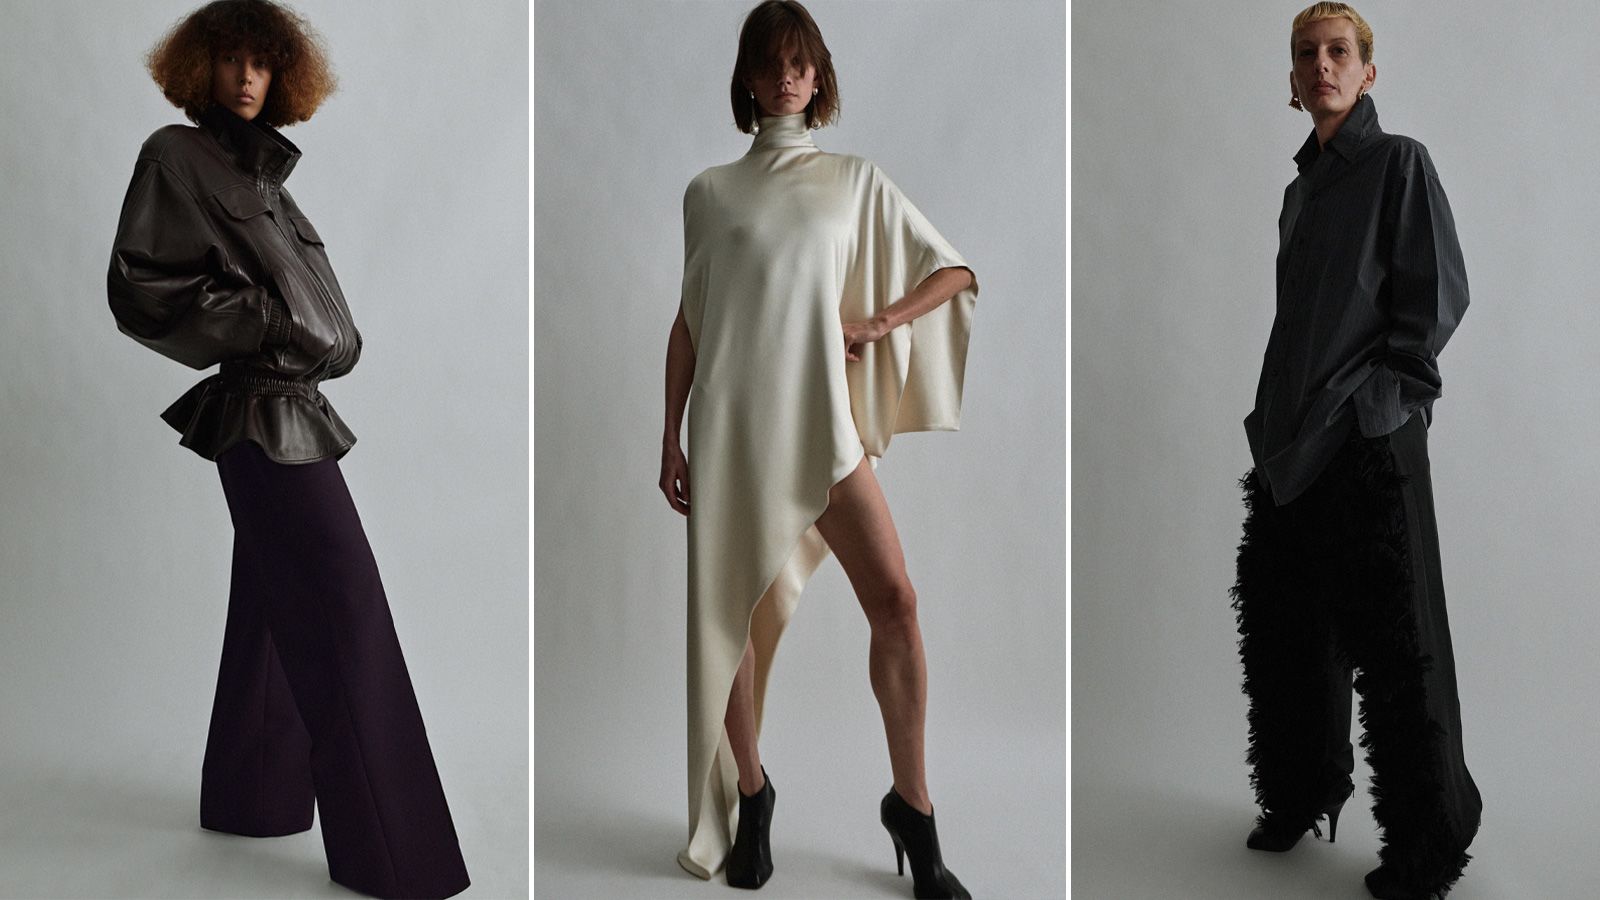 Cult designer Phoebe Philo launches long-awaited debut collection | CNN